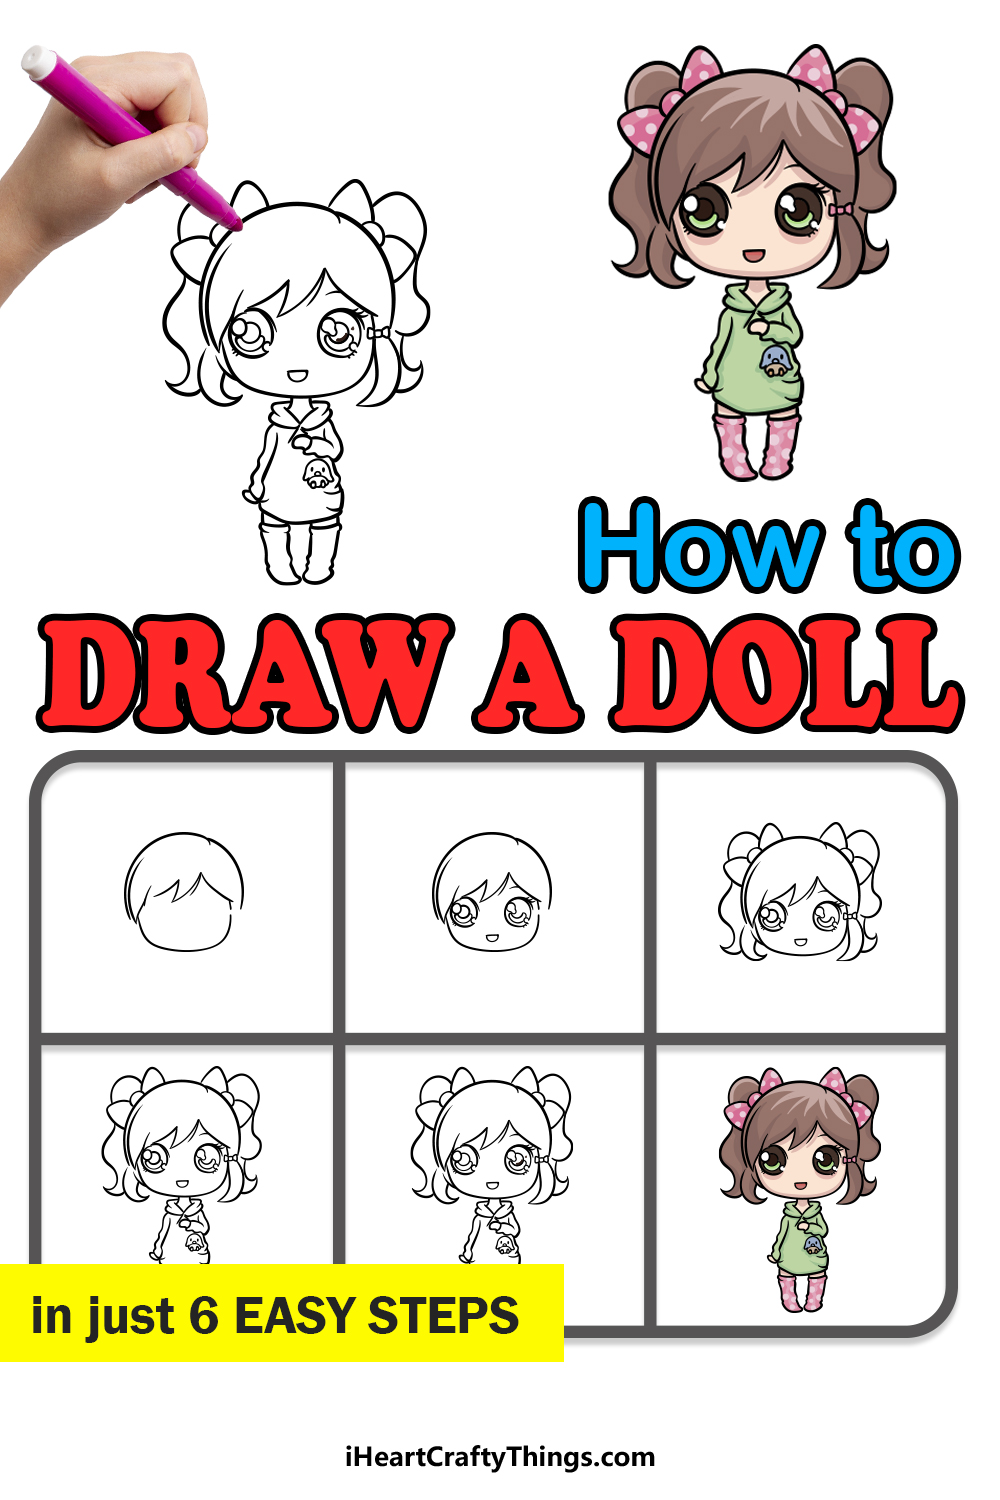 how to draw a doll in 6 easy steps